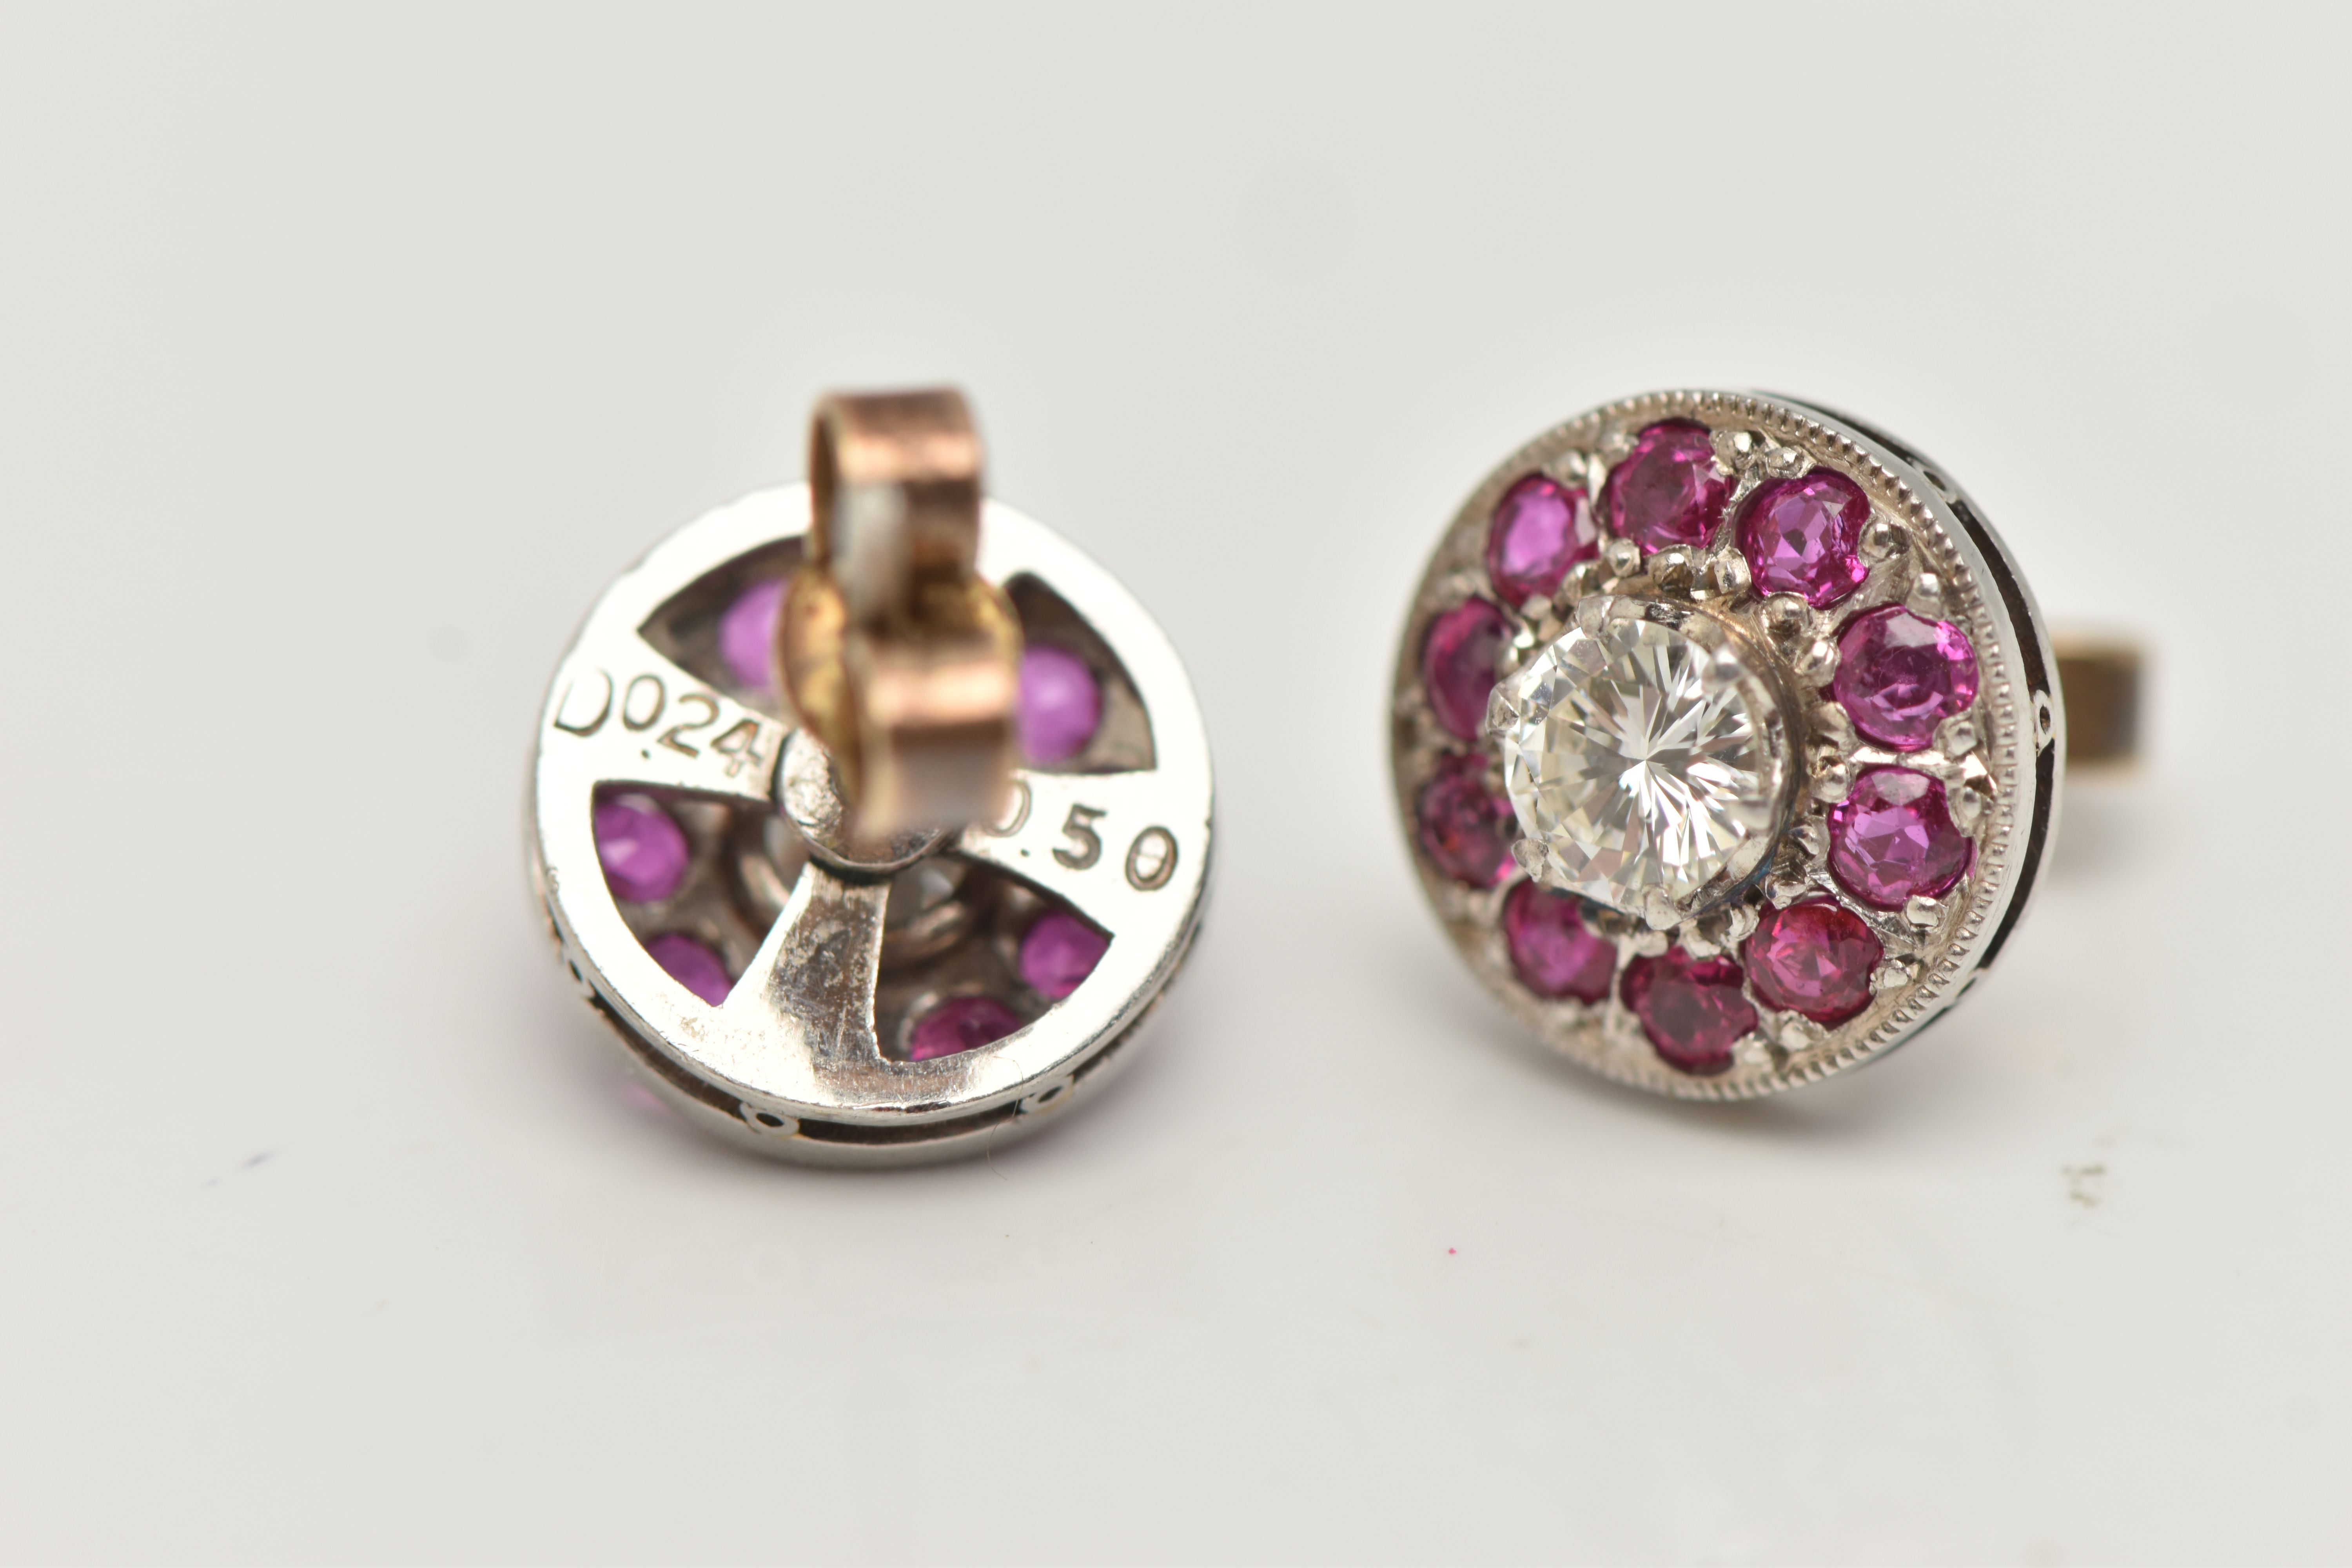 A PAIR OF DIAMOND AND RUBY EARRINGS, designed as a round brilliant cut diamond, set with a - Image 4 of 4